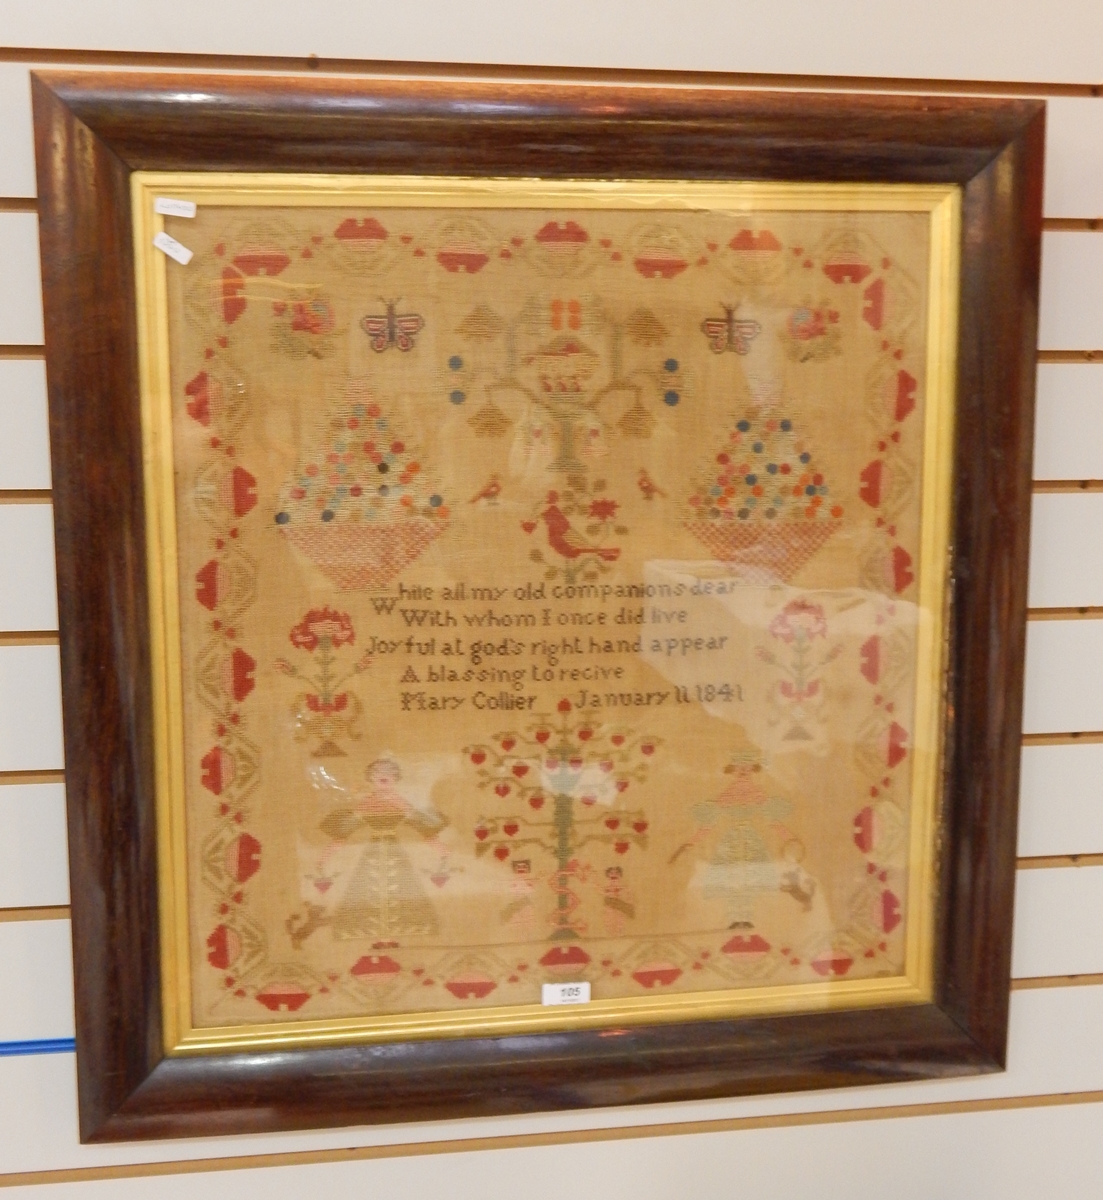 Victorian sampler by Mary Collier, January 1841, 57.5cm x 54.